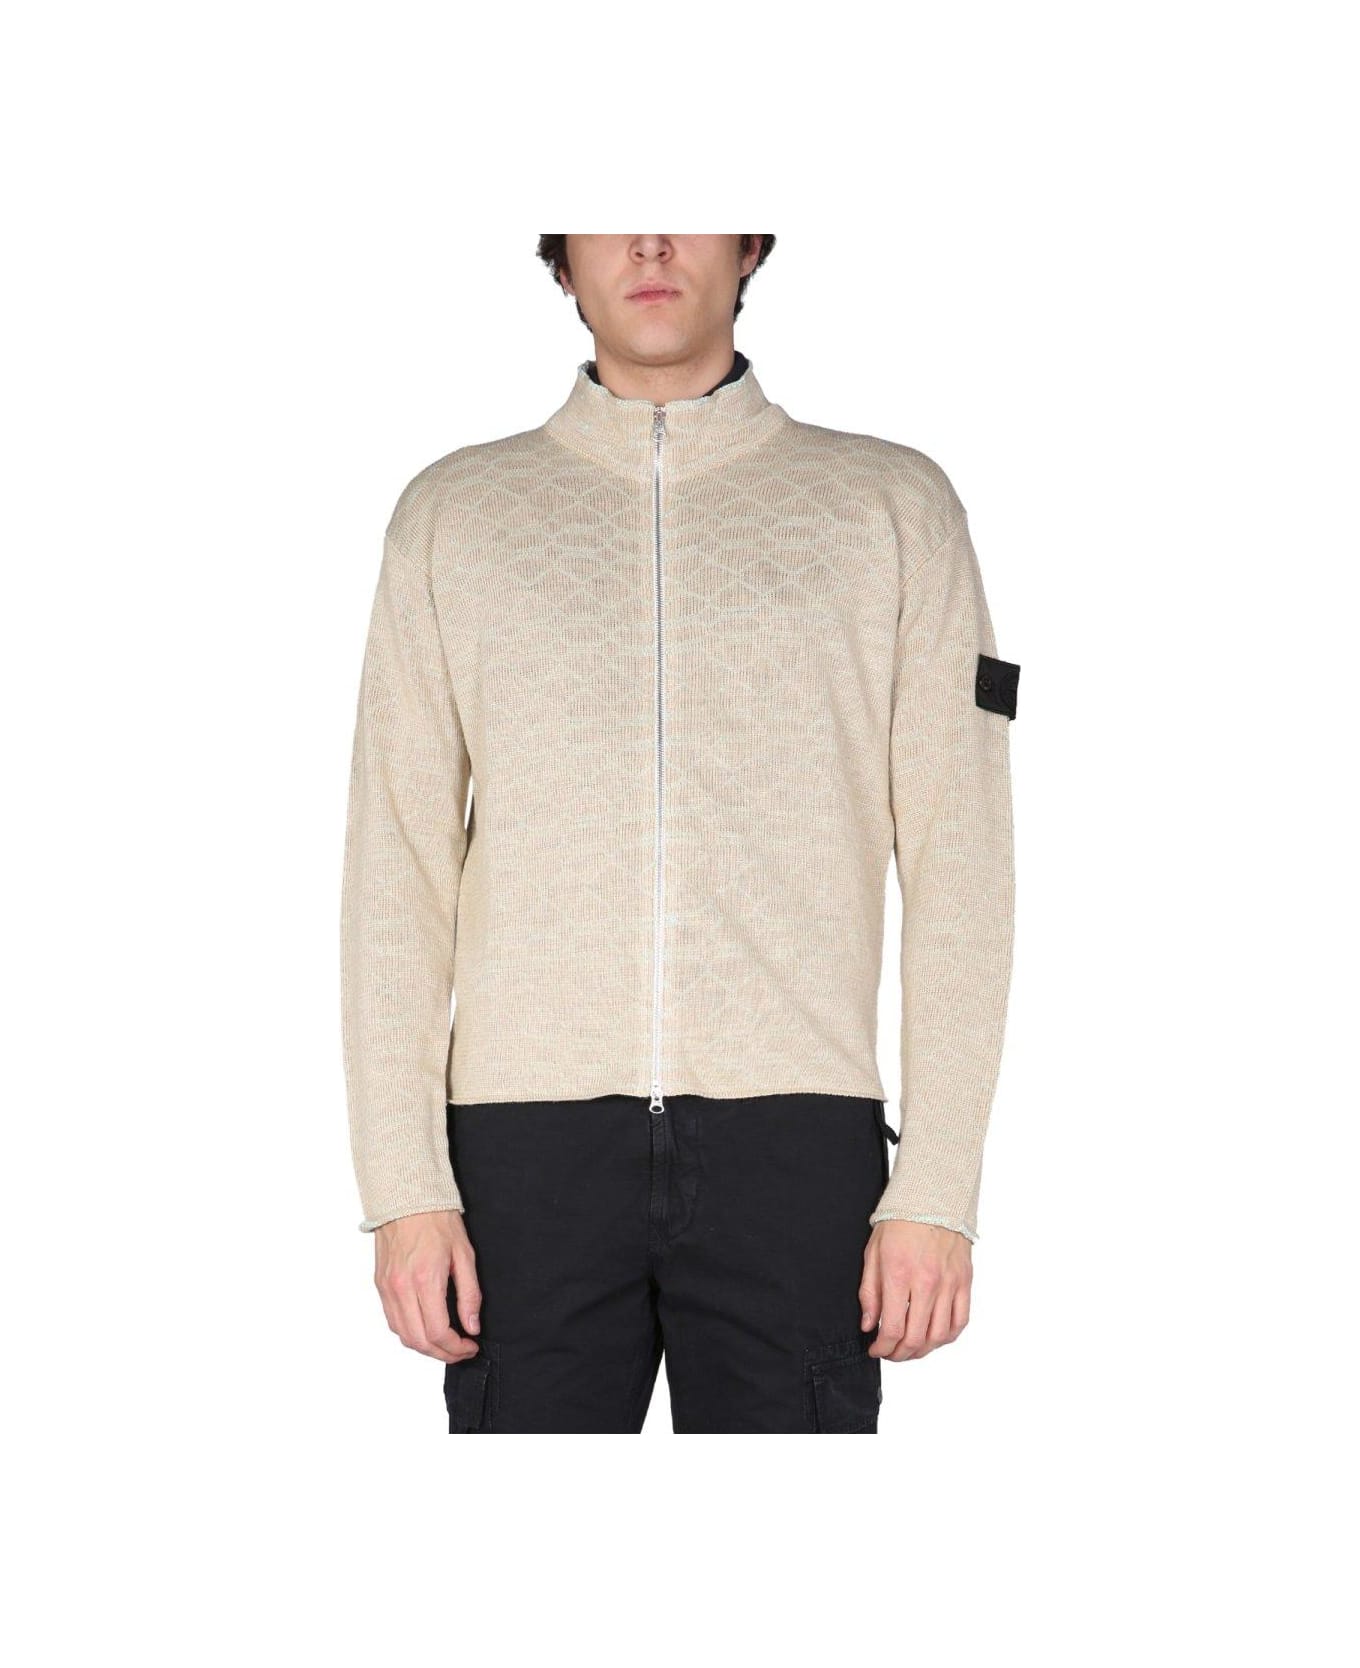 Stone Island Shadow Project Compass Patch Zipped Jacket - BEIGE カーディガン